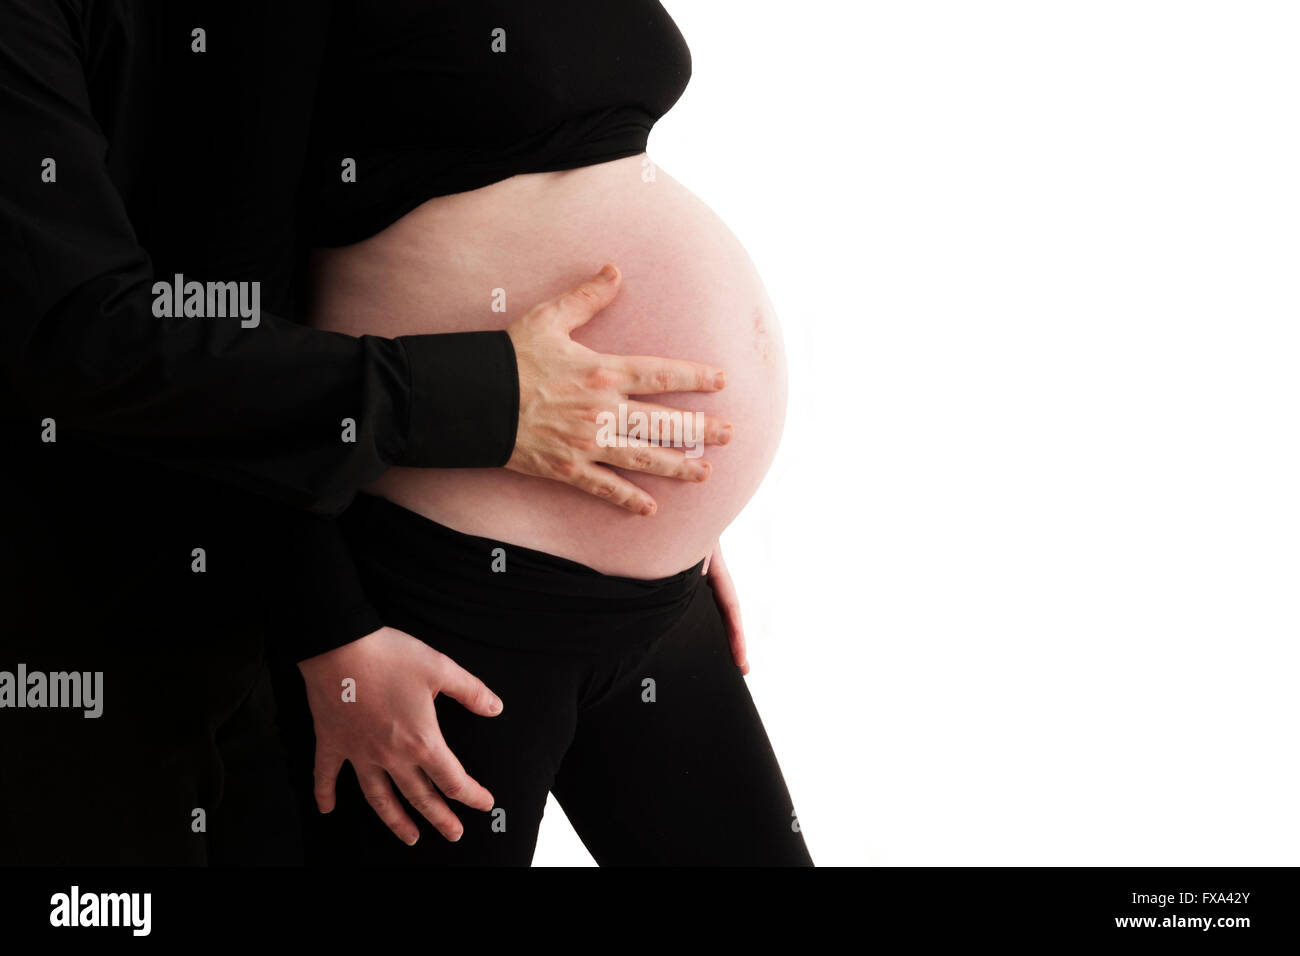 Heavily Pregnant Black High Resolution Stock Photography and Images - Alamy